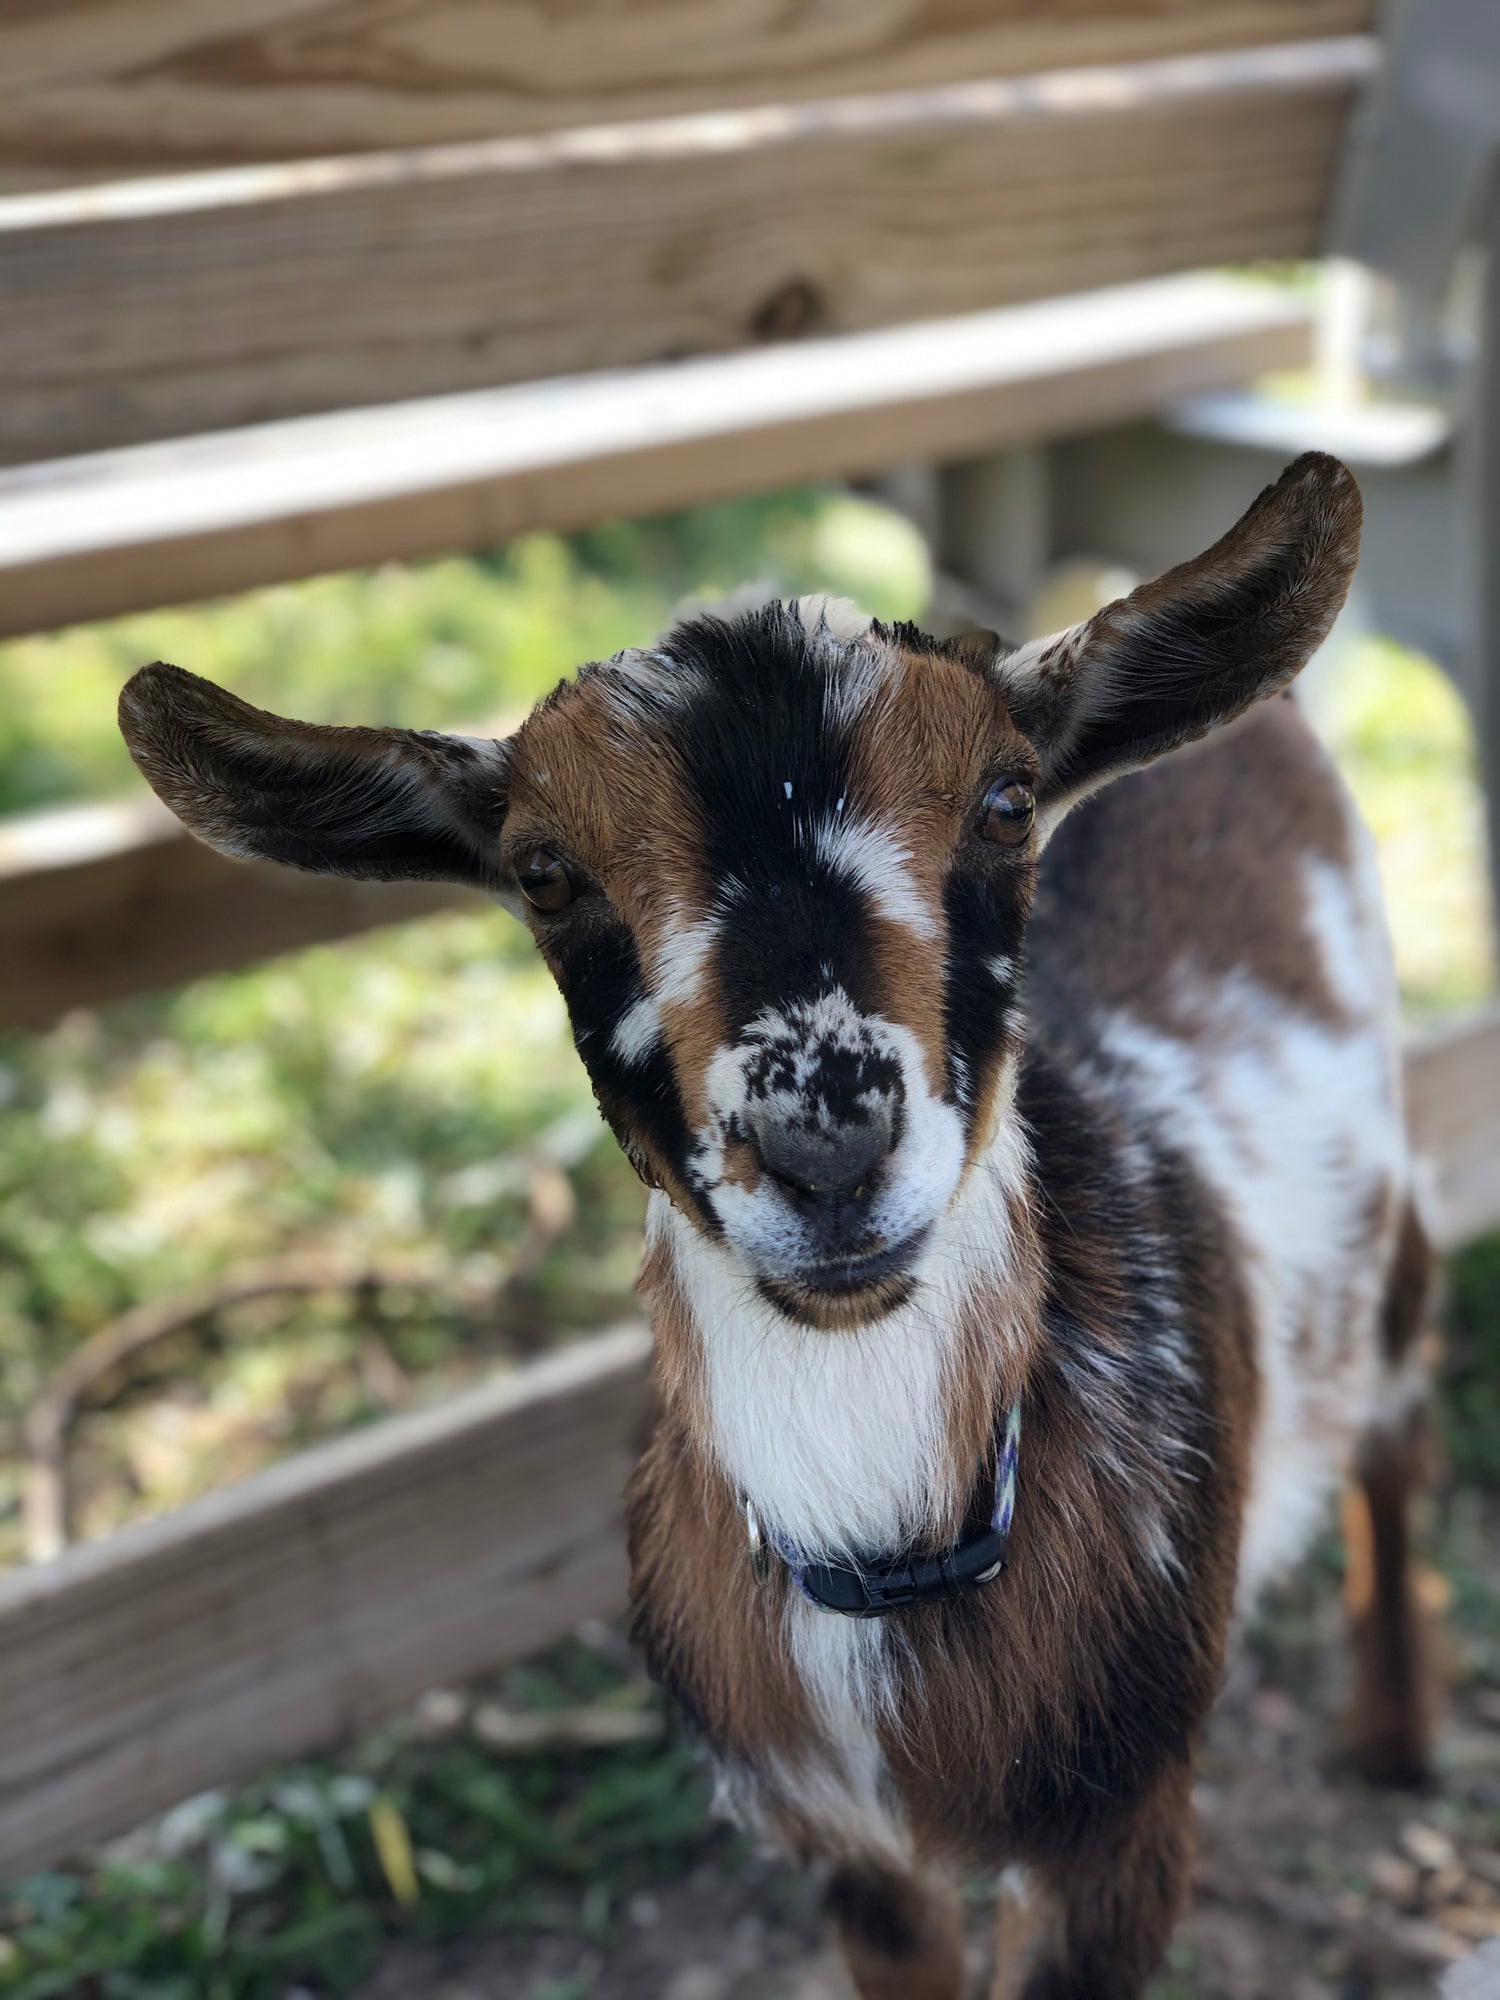 Nigerian Dwarf goat standing in front of fence